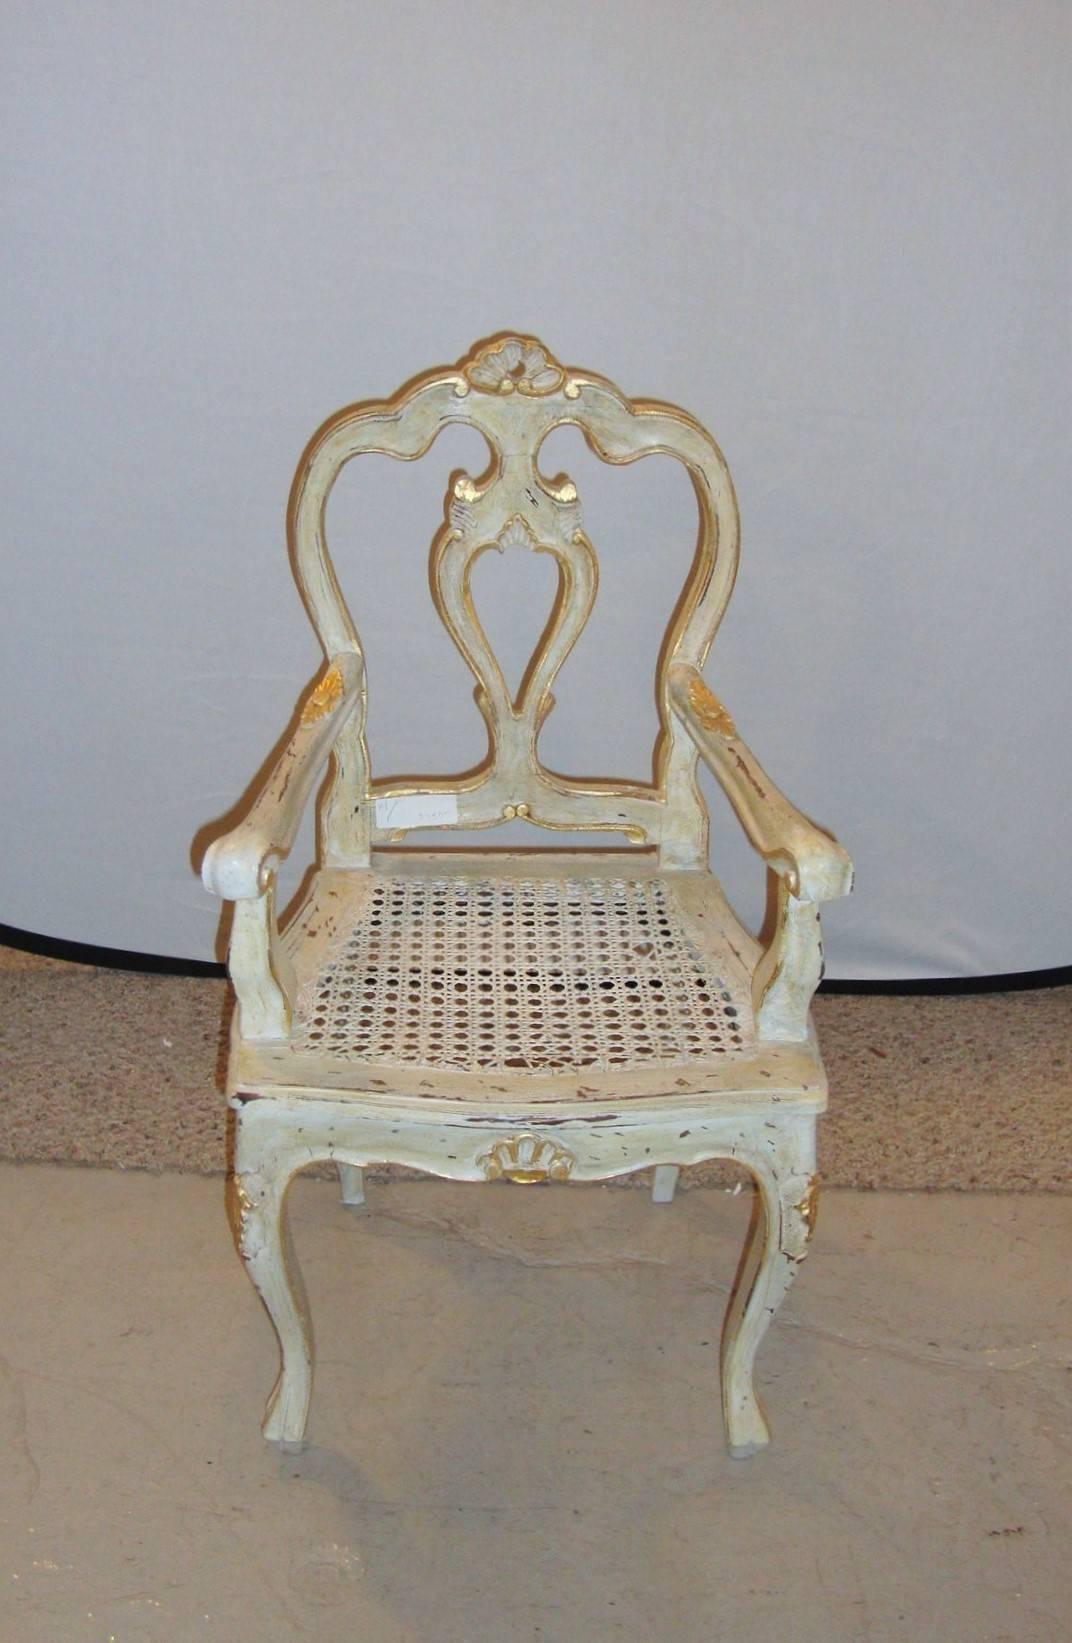 Paint and gilt decorated armchair Louis XV style. Fine child's or doll chair in white finish with gilt highlights fashioned in the Louis XV style. This finely distressed armchair is very decorative.

  